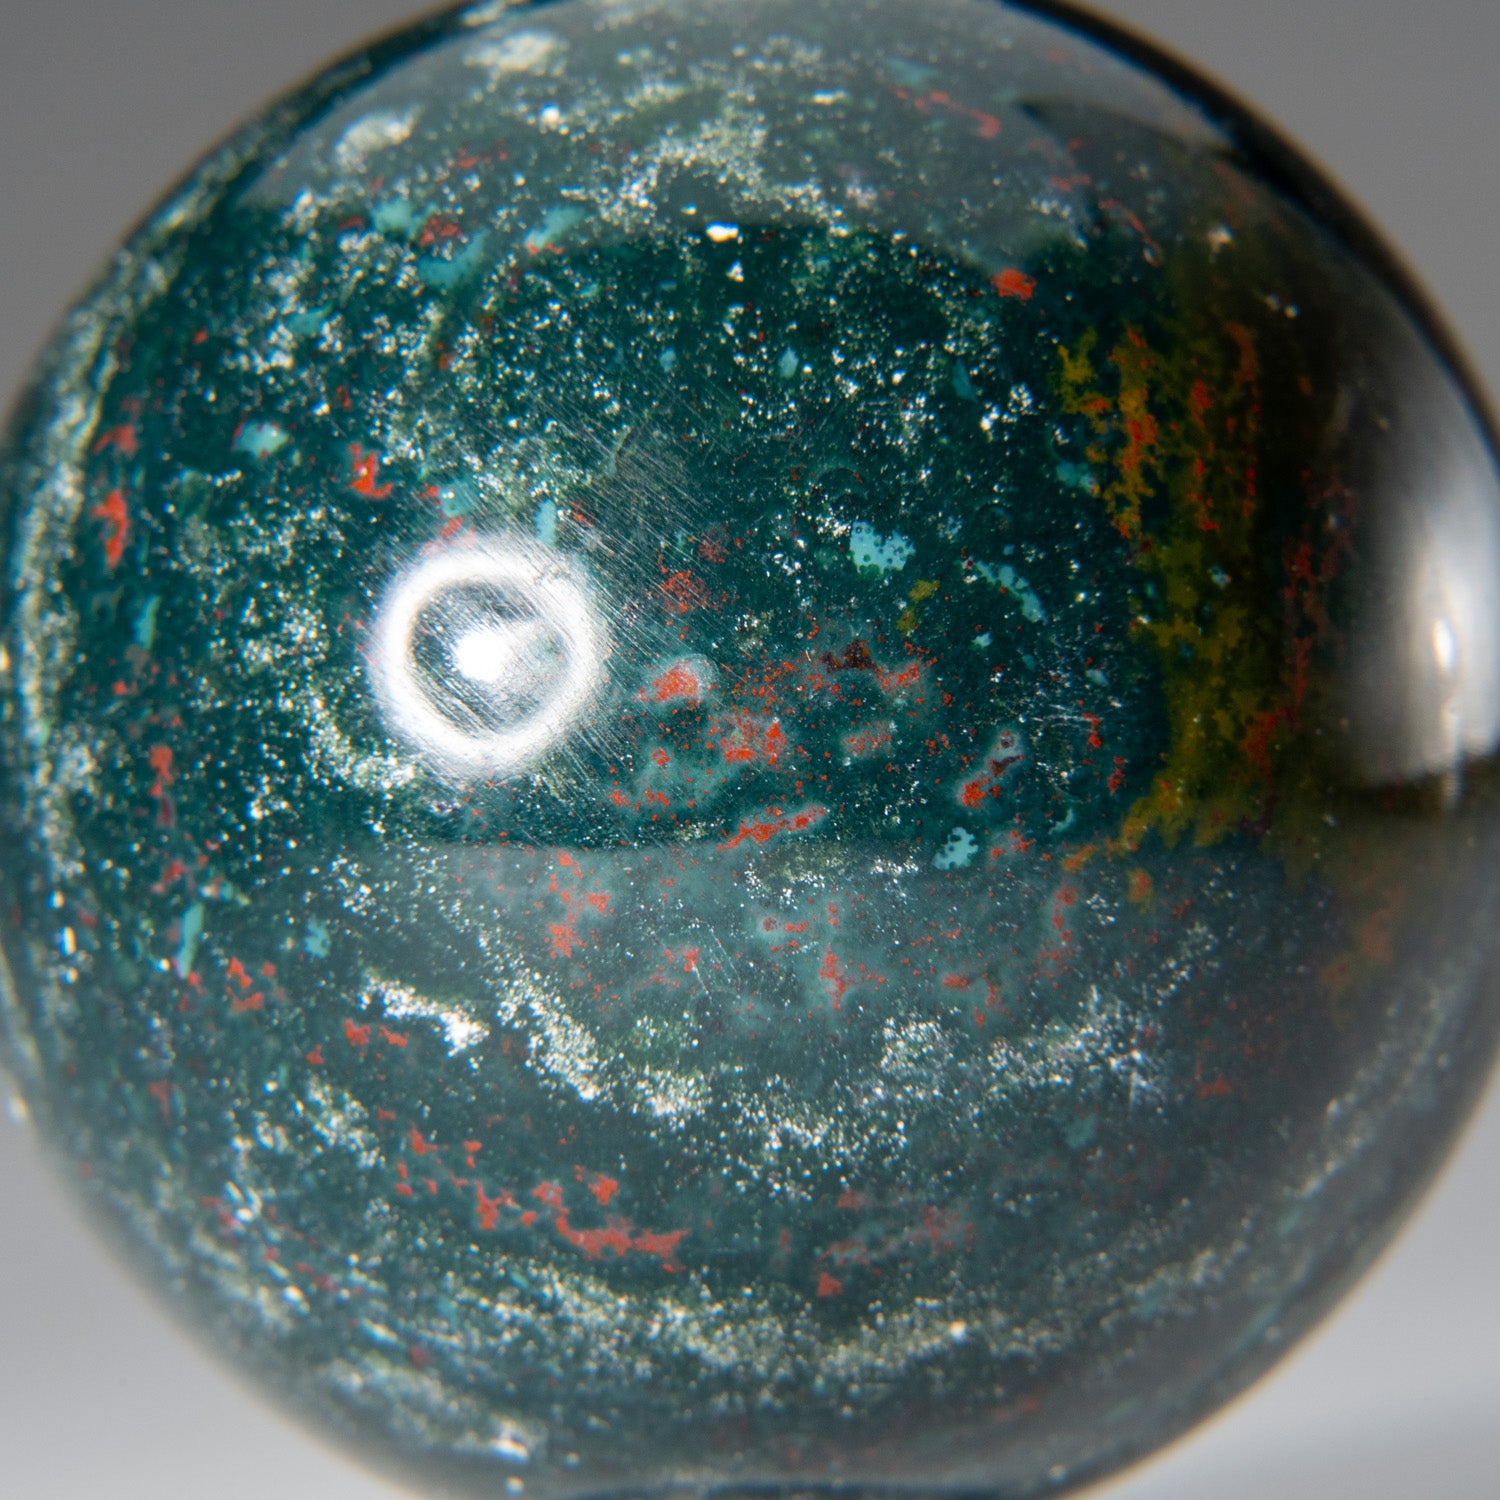 Genuine Polished Bloodstone Sphere (1.75") with Acrylic Display Stand